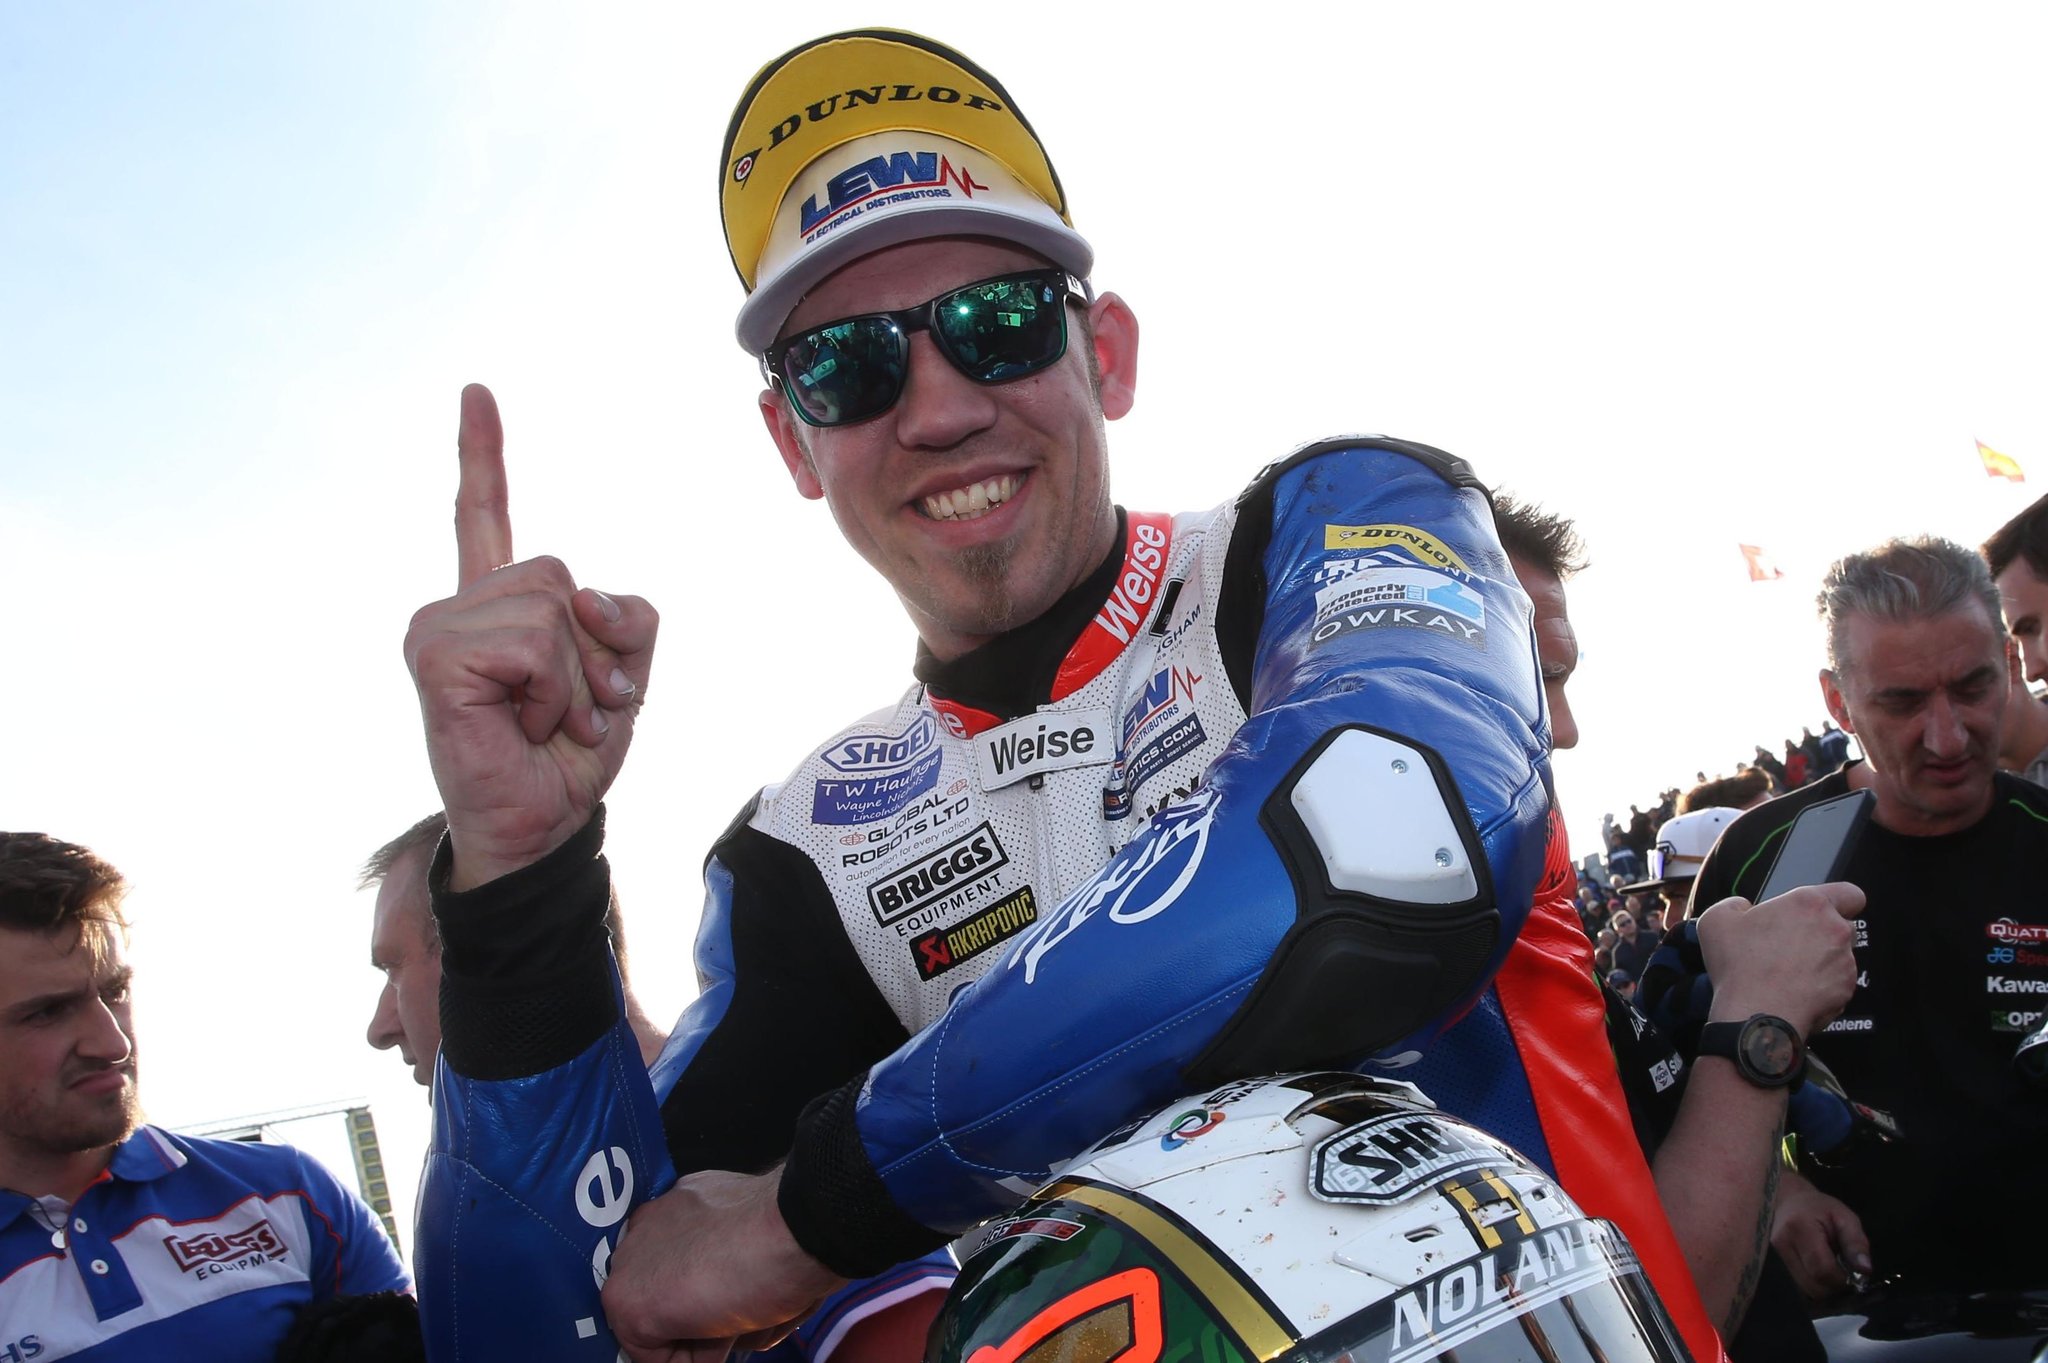 Peter Hickman faces NW200 dilemma over regulations